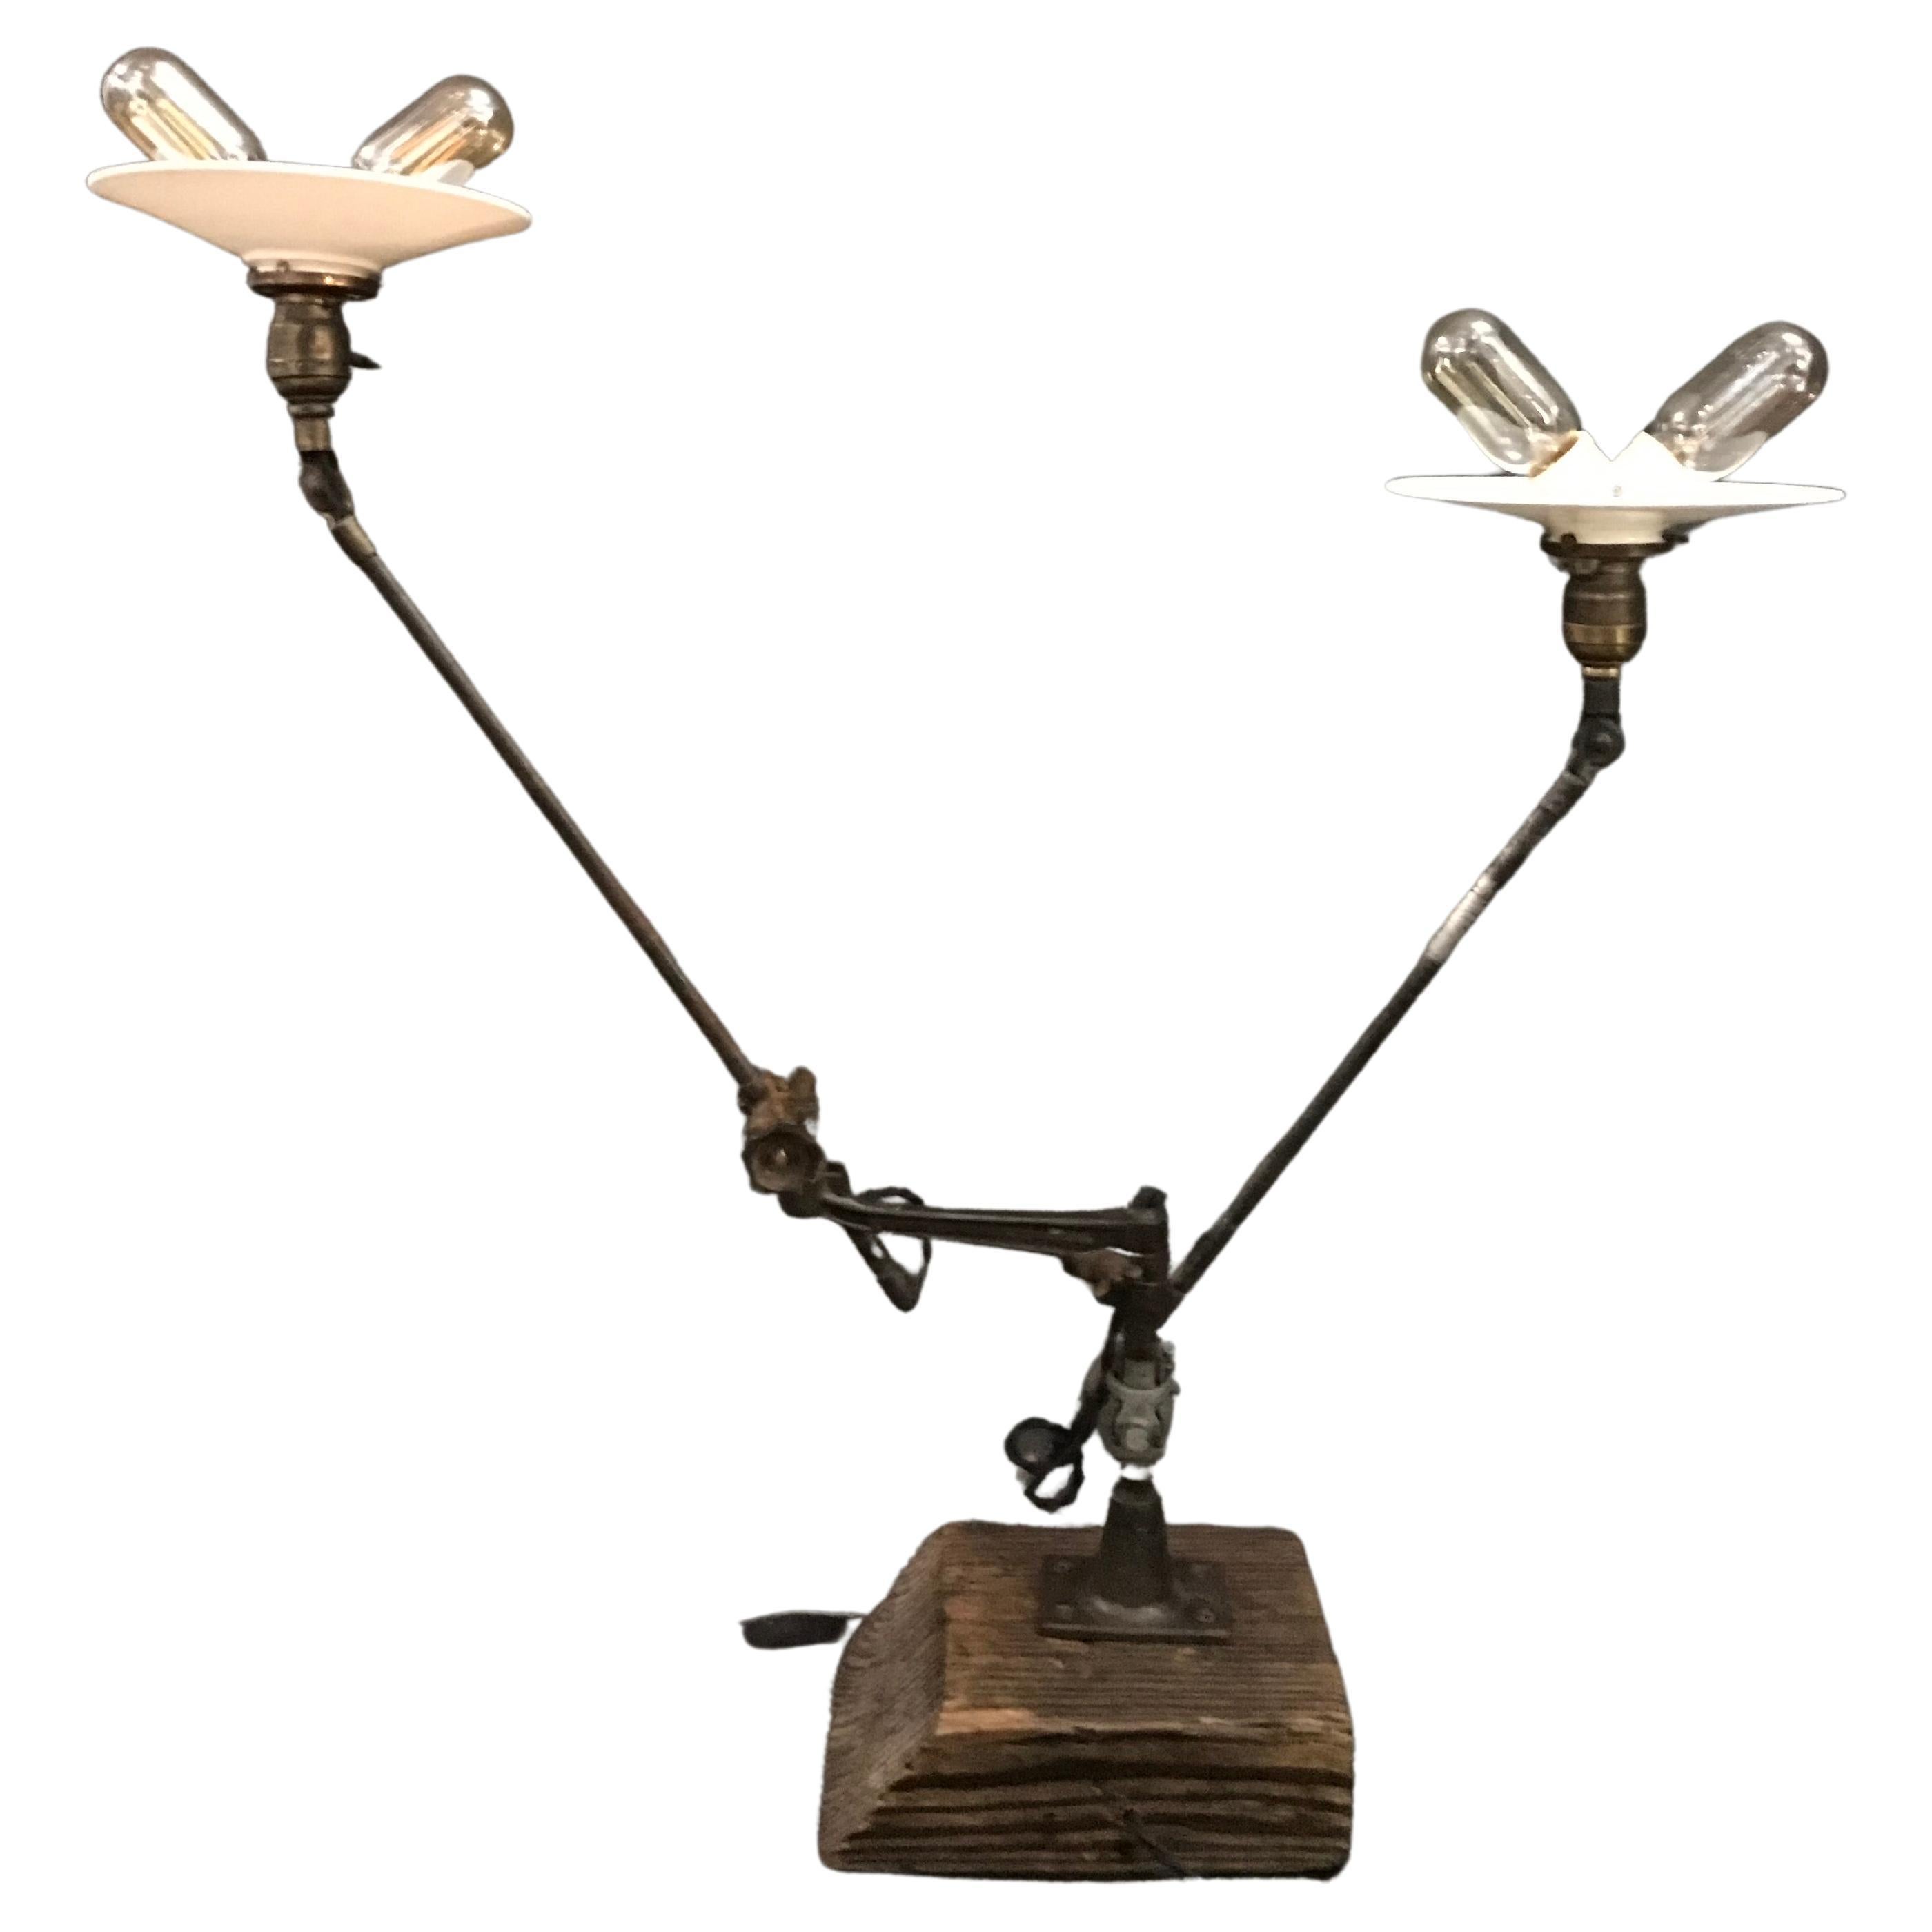 A two arm O.C. White table mount task lamp set on a reclaimed piece of French mantle wood. In vintage original unrestored patina, and freshly rewired with antique black cloth wire, featuring all original of period parts including two 8.5” round